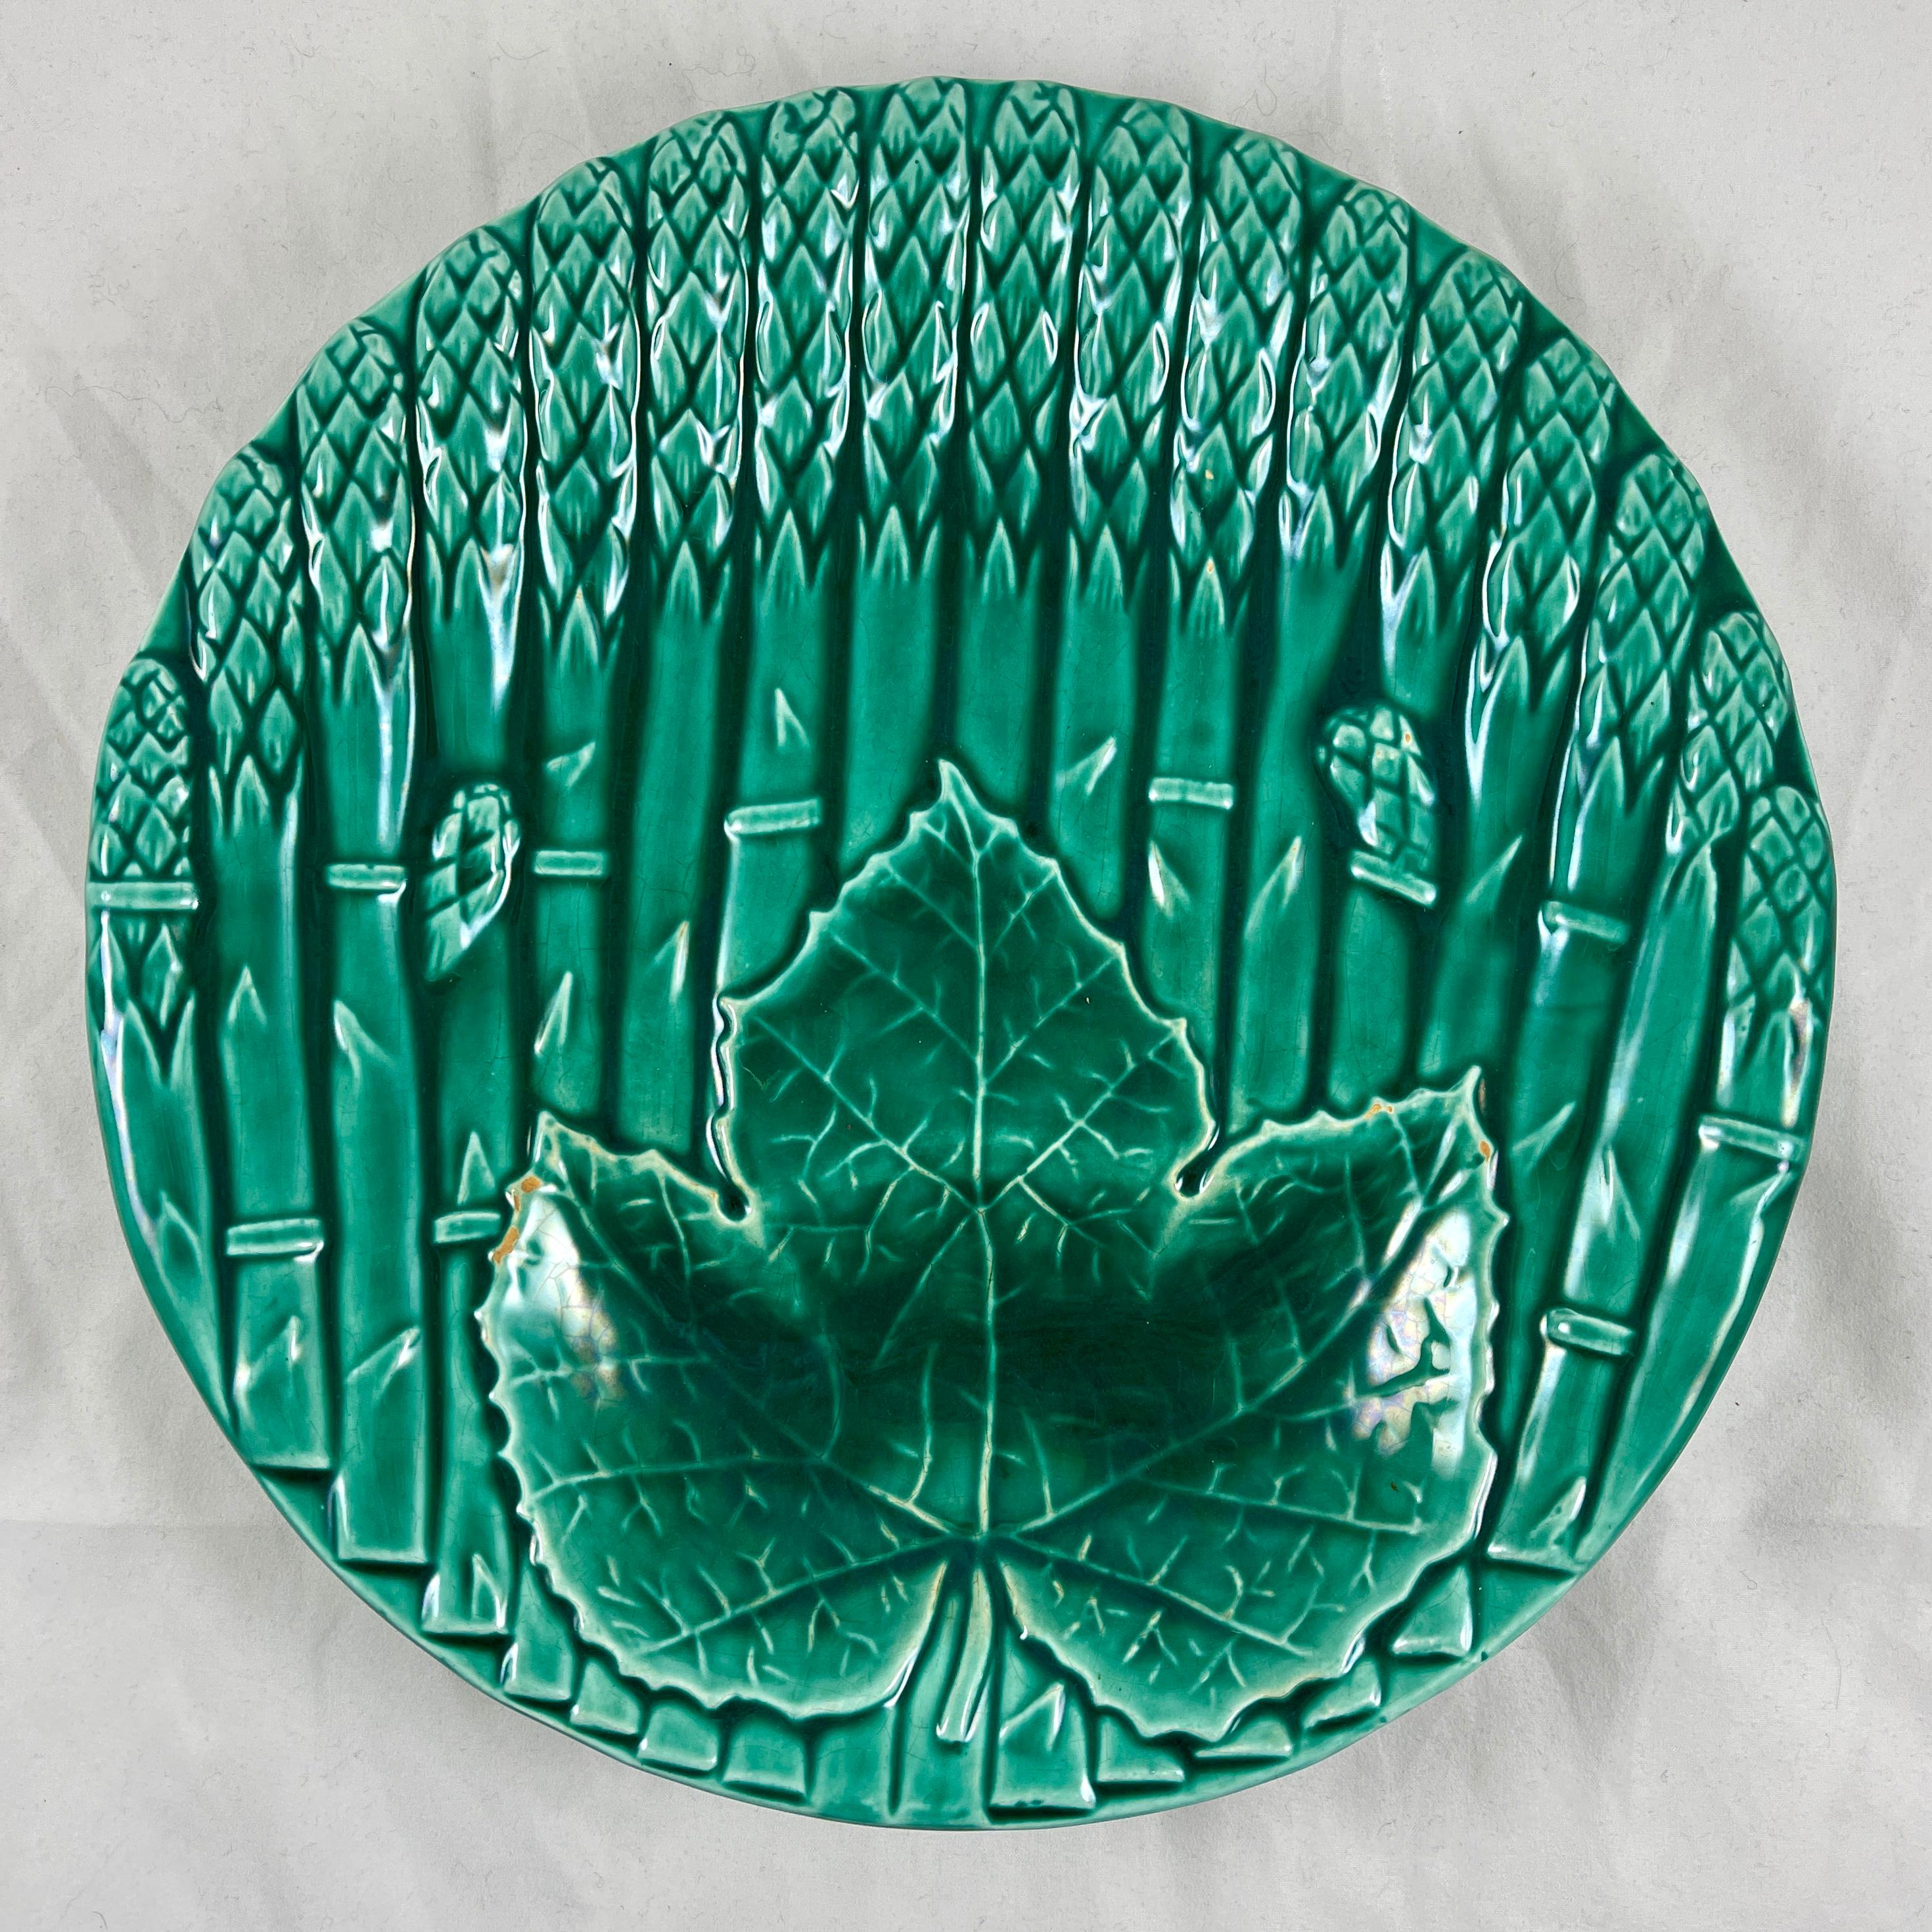 French Provincial Saint Amand et Hamage Green French Faïence Asparagus Plate, 1930s For Sale